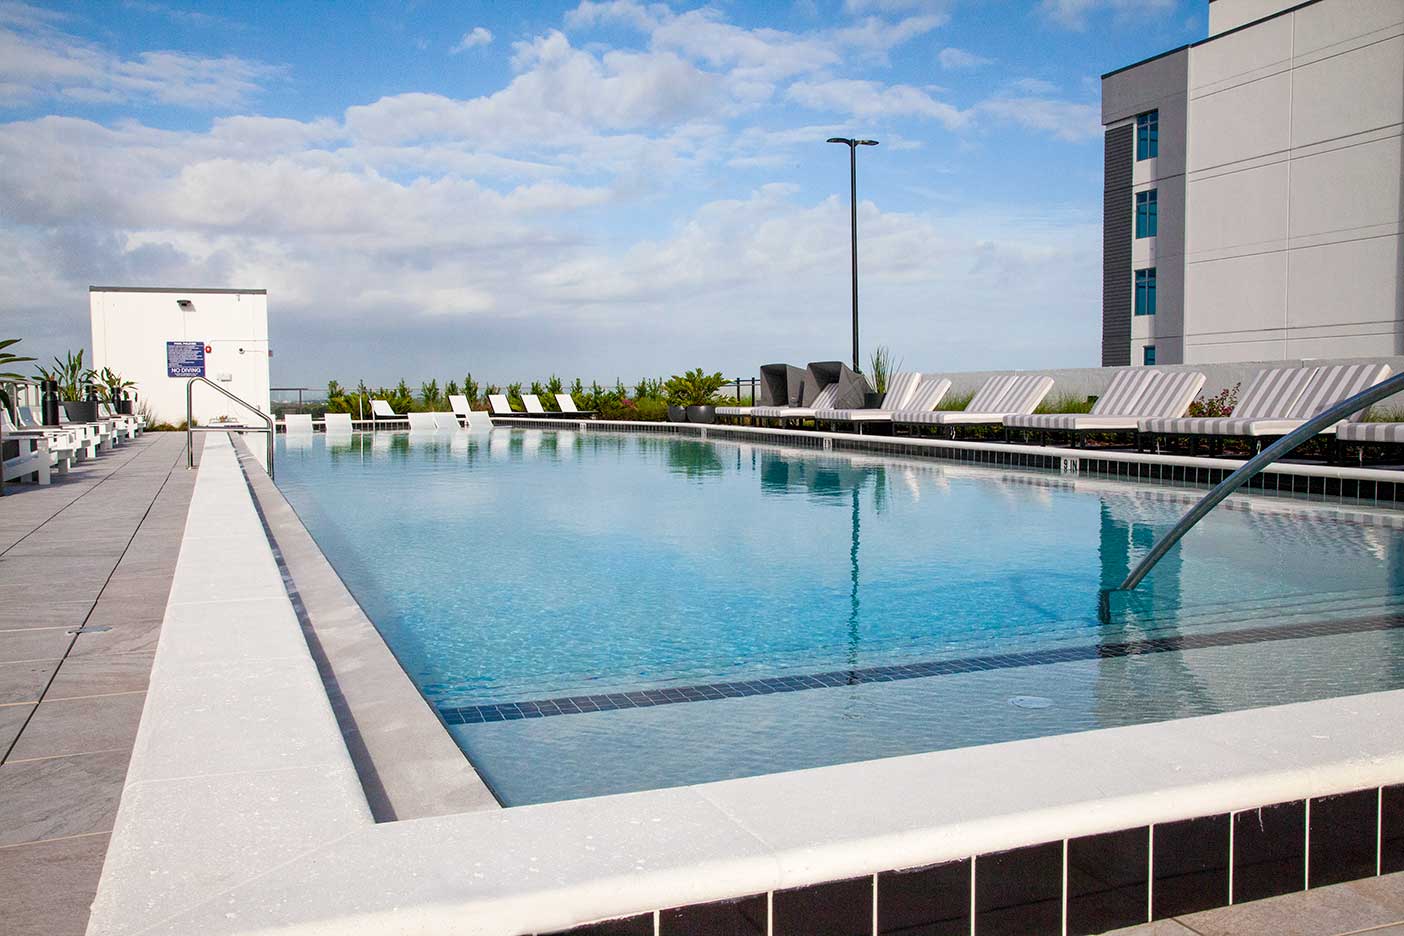 The Julian Apartments rooftop pool on the 10th floor